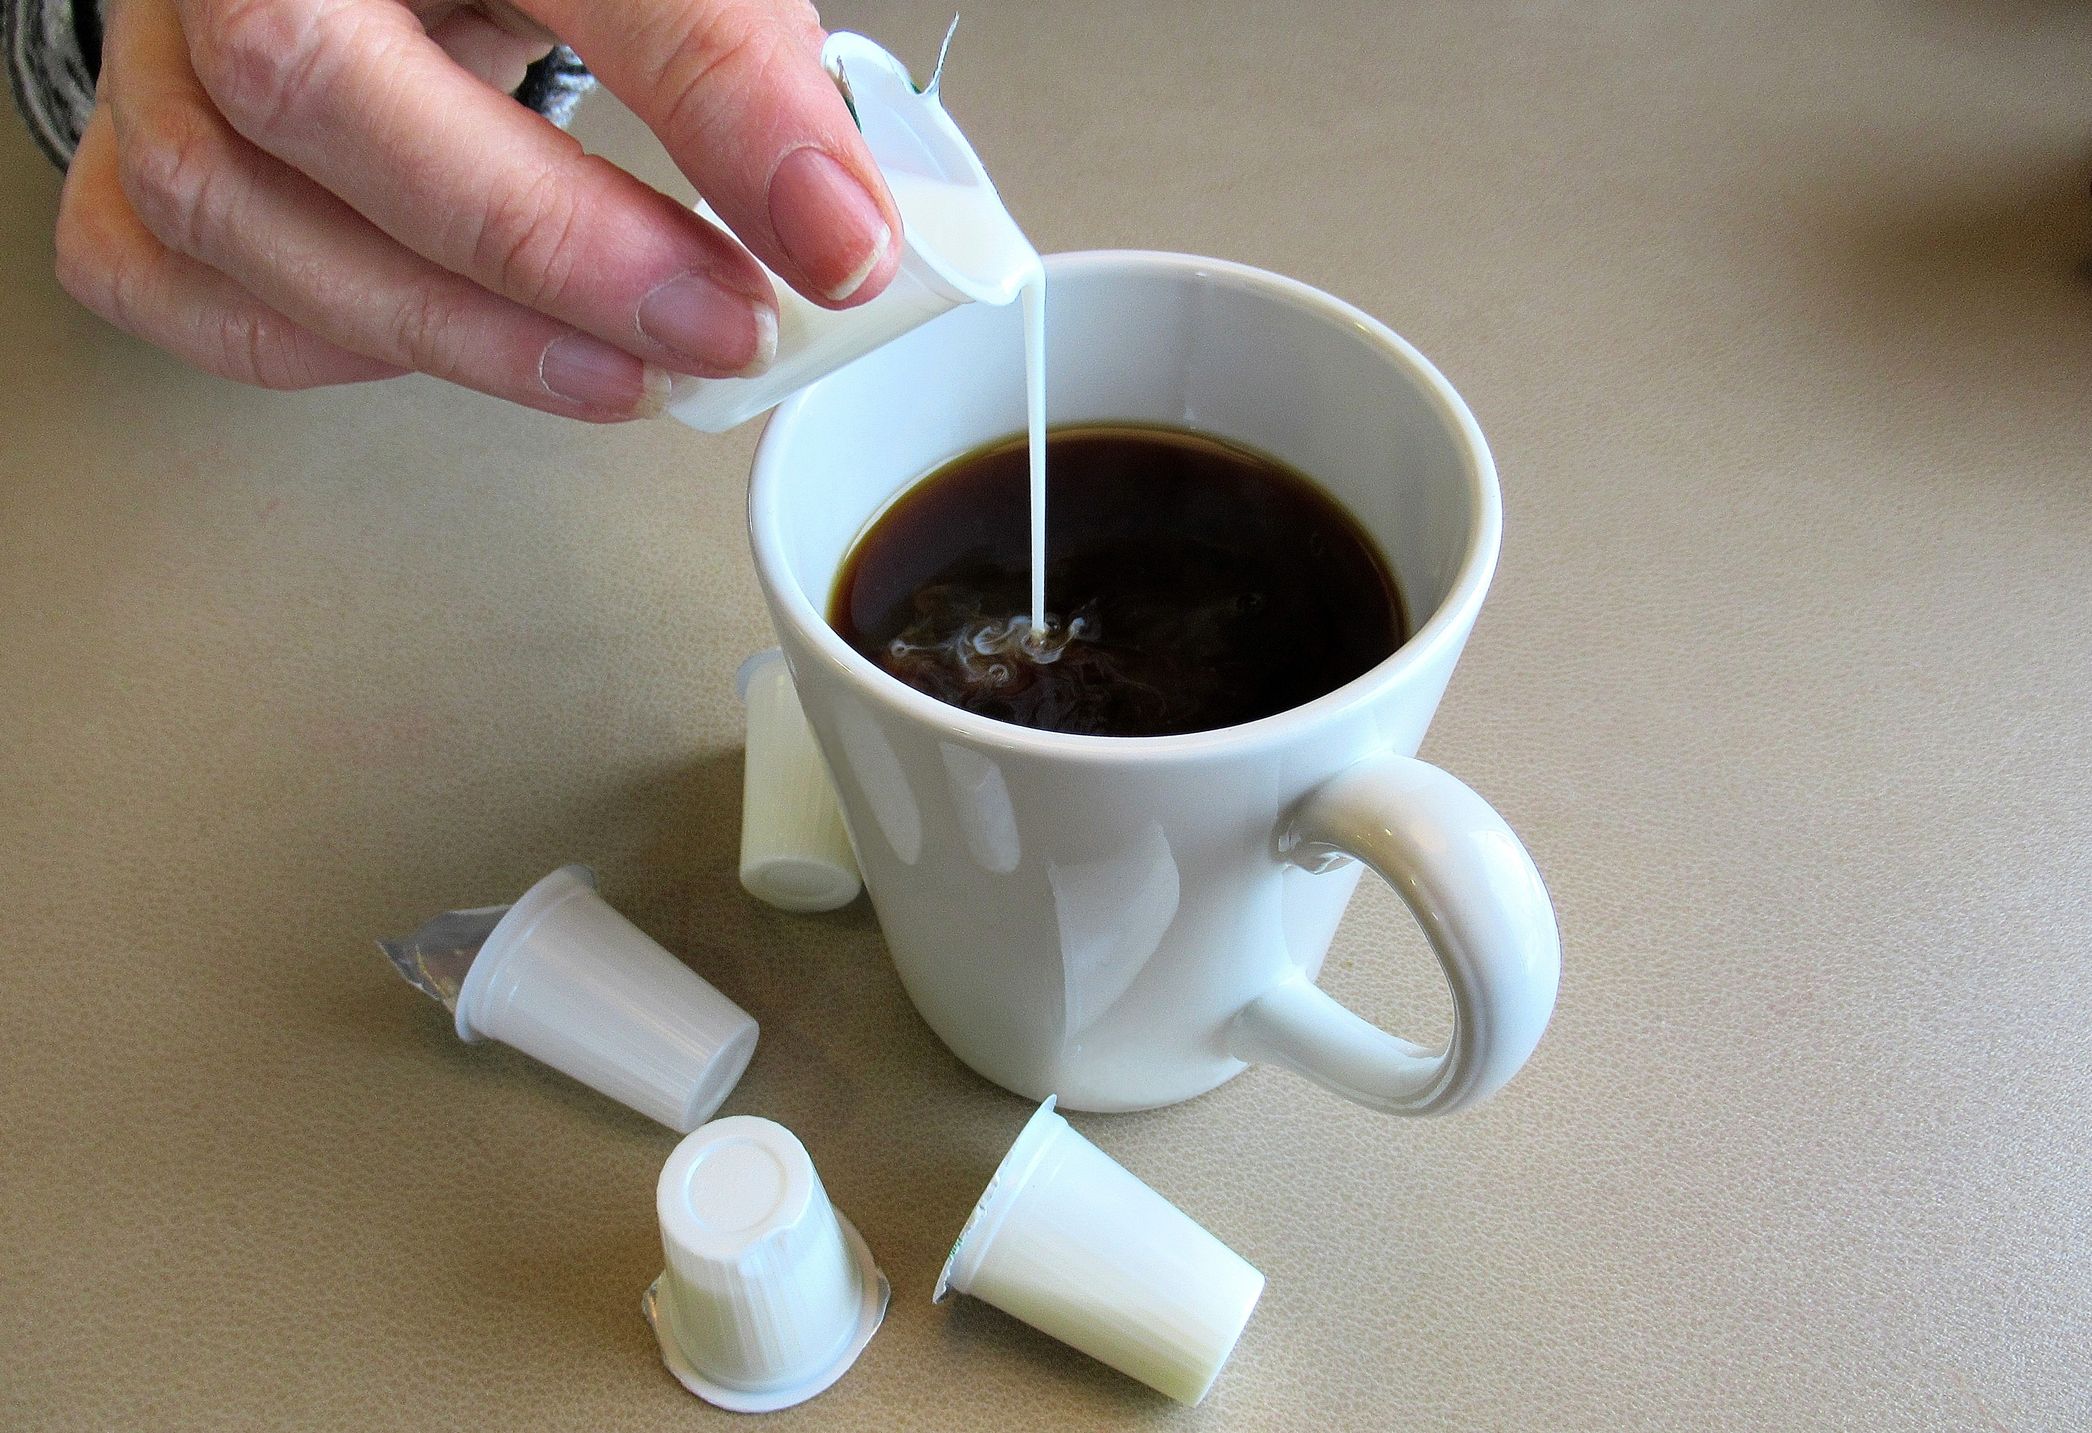 This is the Largest Single Coffee Creamer You Ever Did See